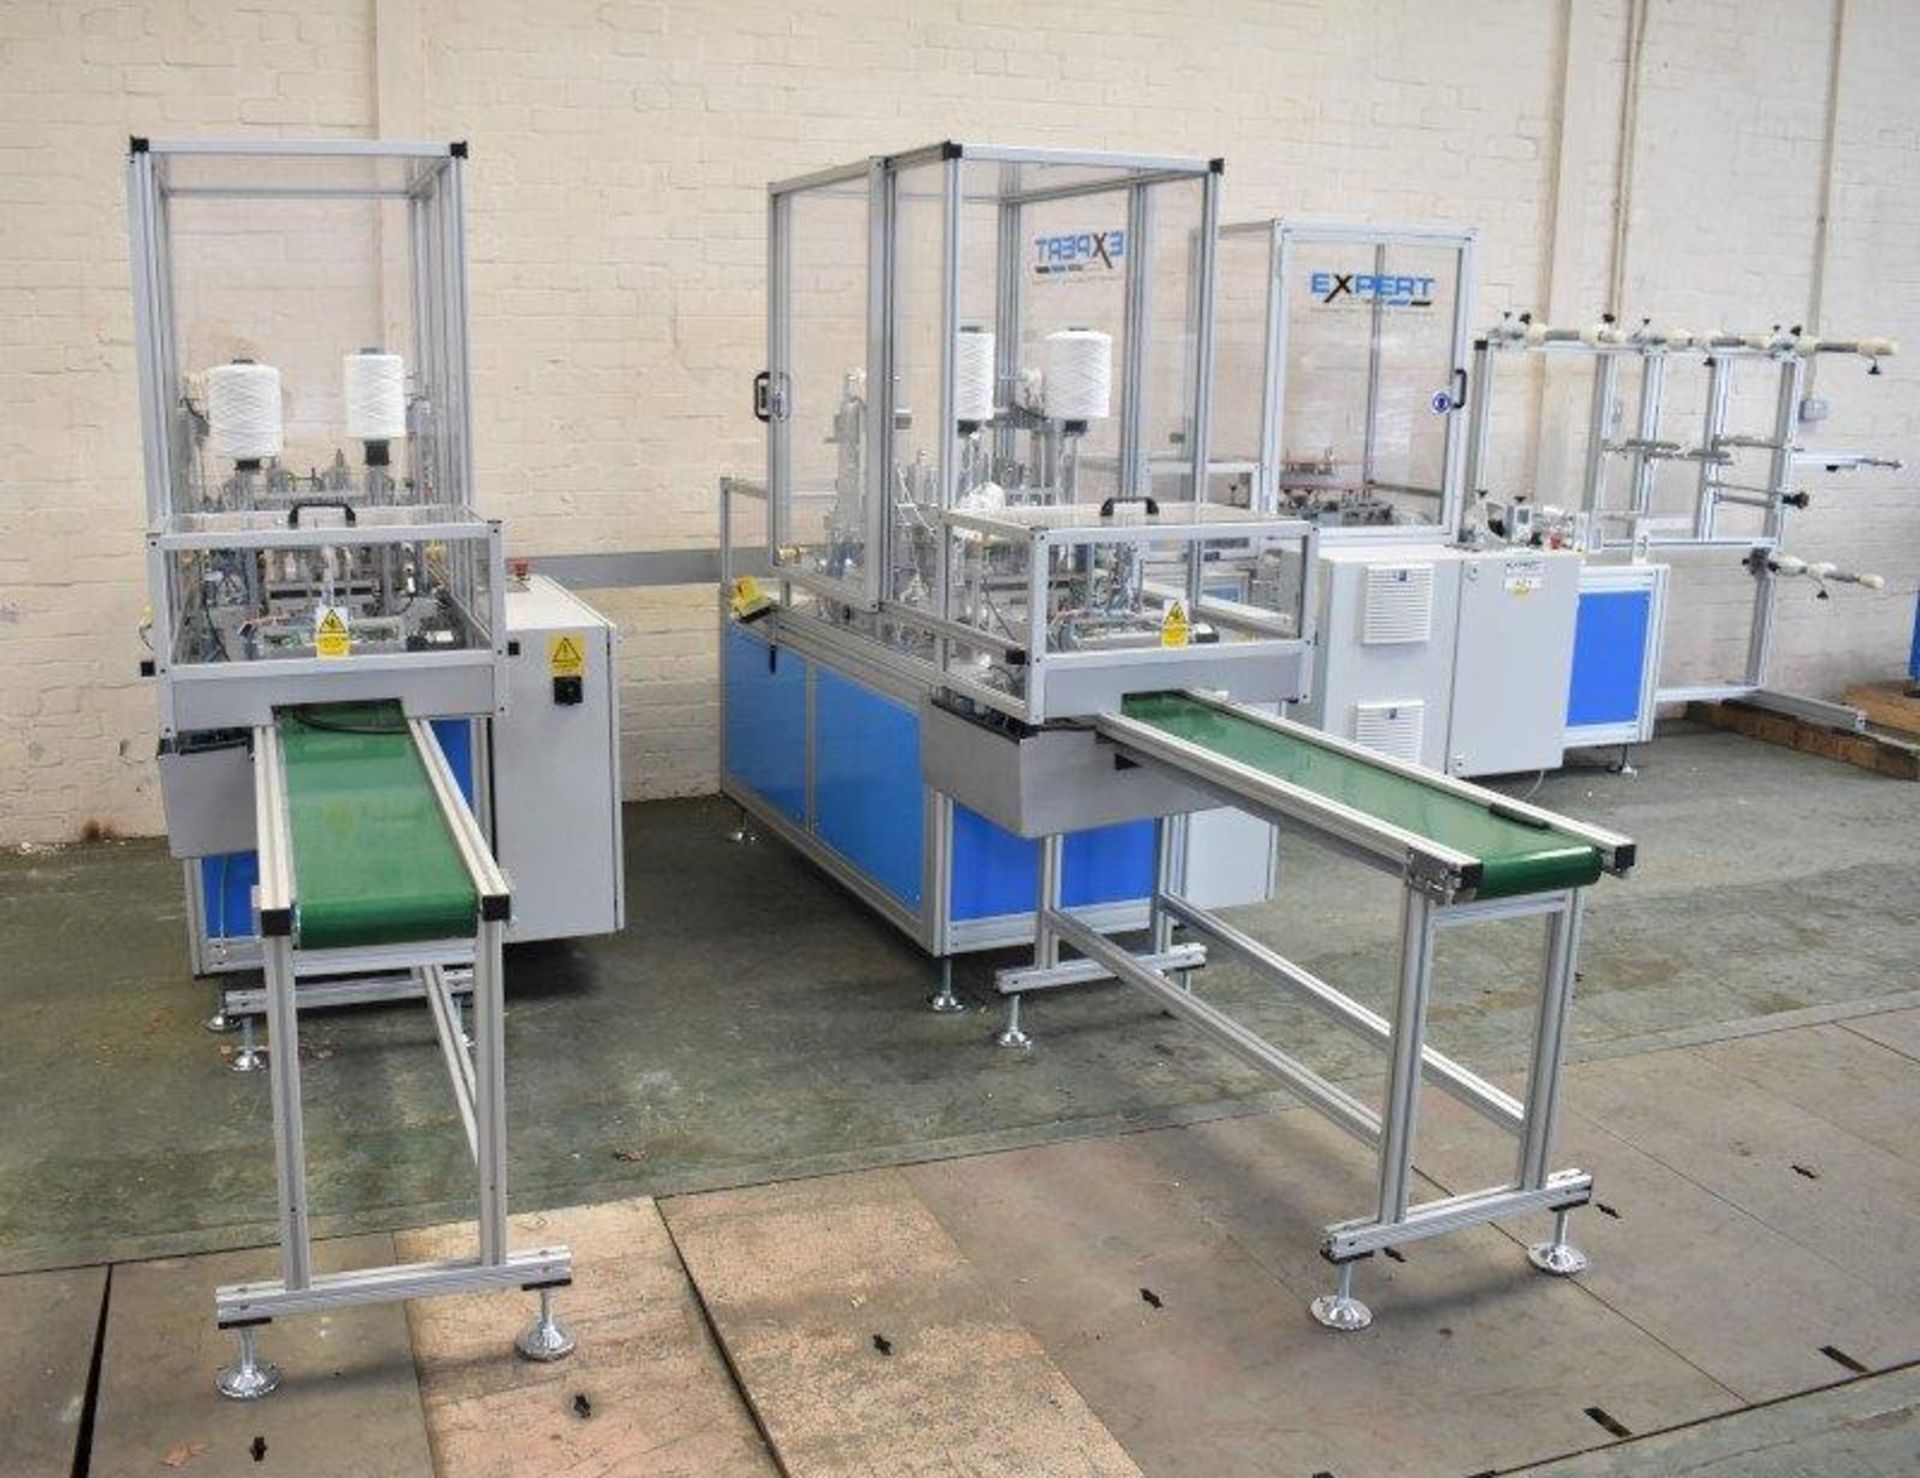 Expert fully automated Mask Making Machine - manufactured in 2020. - Image 15 of 20